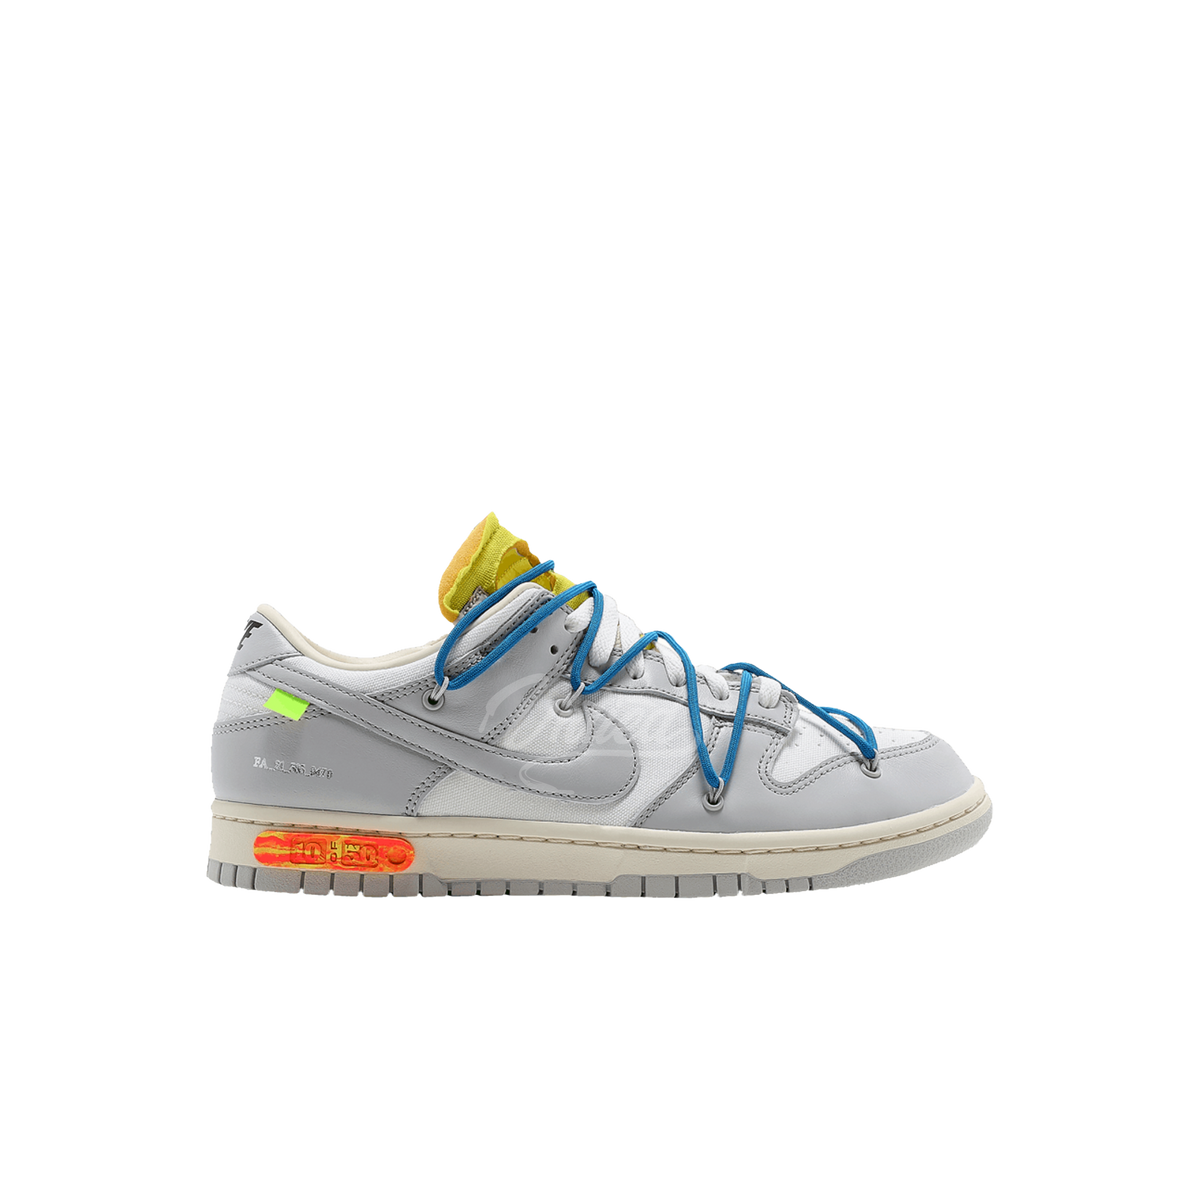 Off-White Nike Dunk Low "Lot 10"